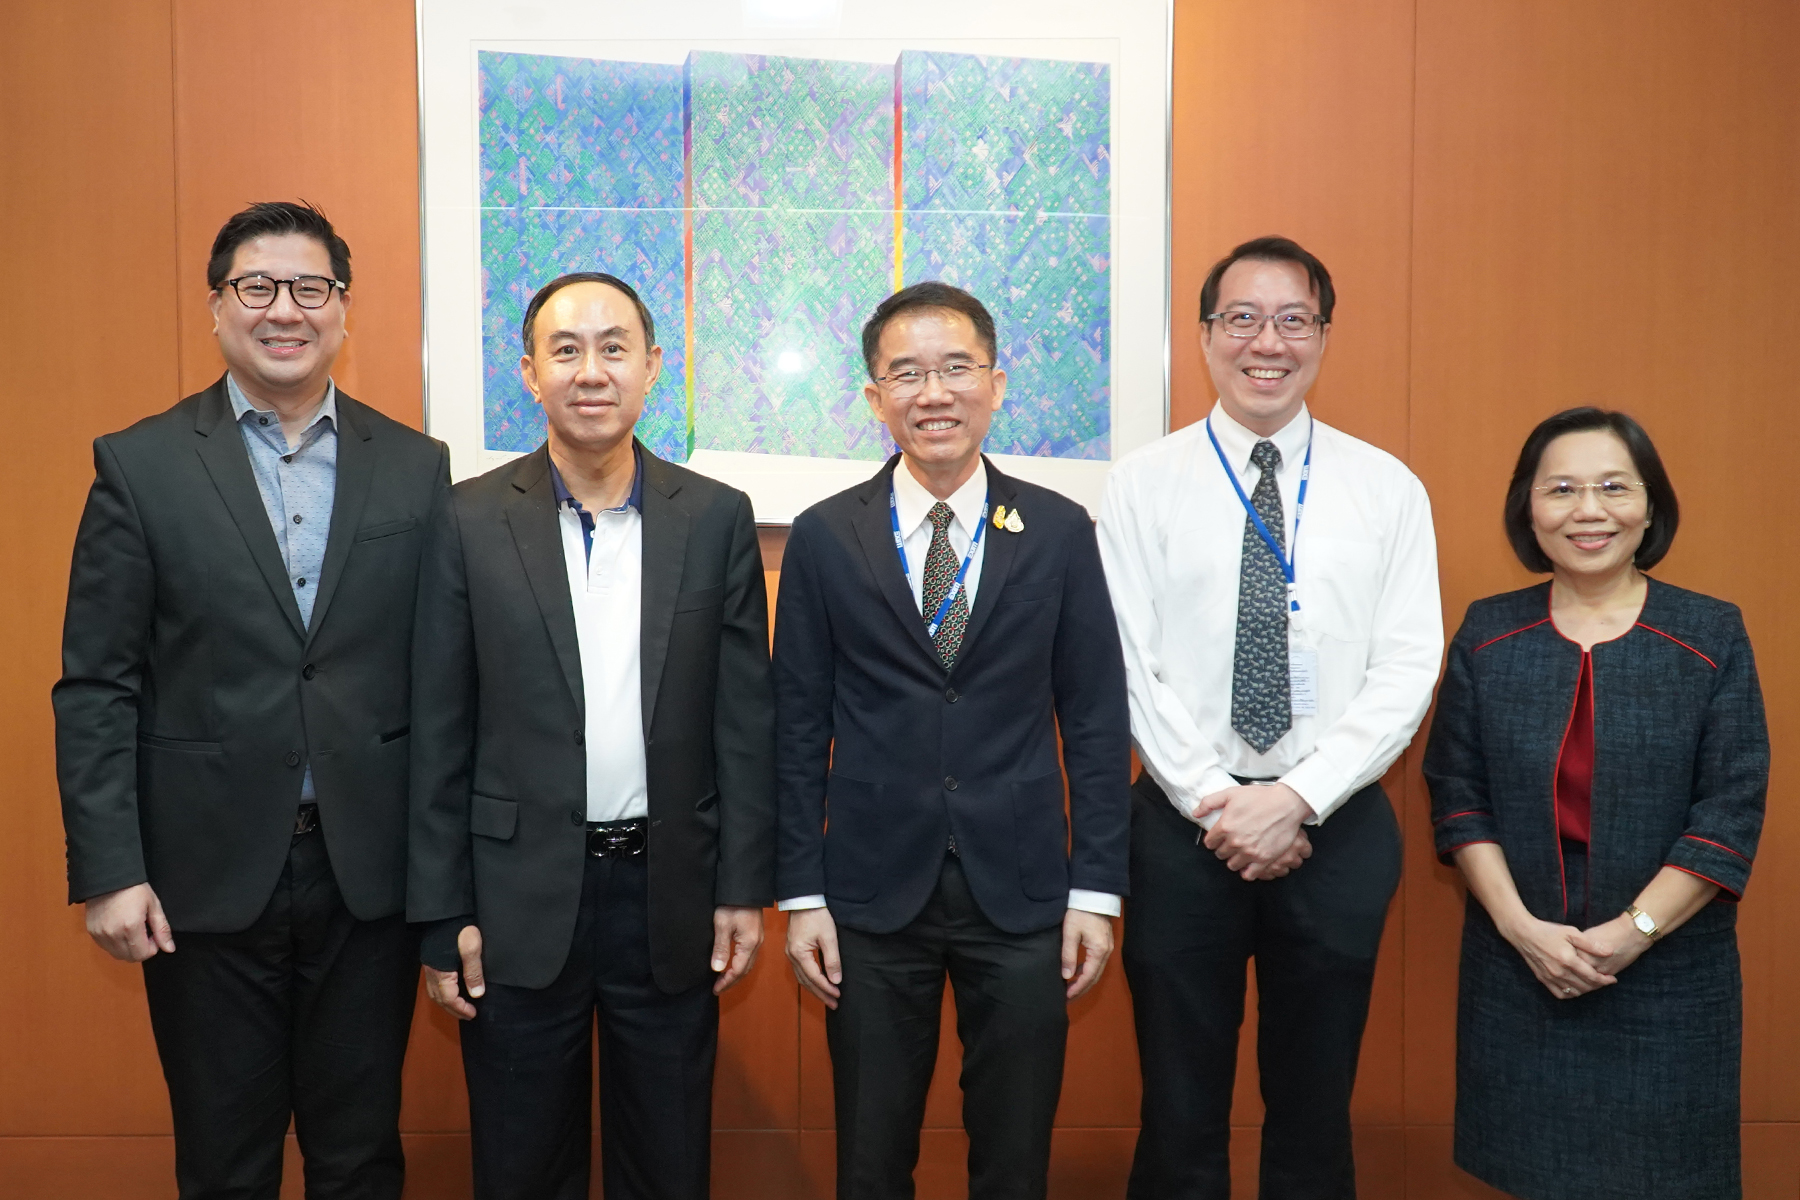 EXIM Thailand and Faculty of Economics, Thammasat University  Discuss Ways to Help Students Reach Their Potential and Share Knowledge on International Trade and Investment